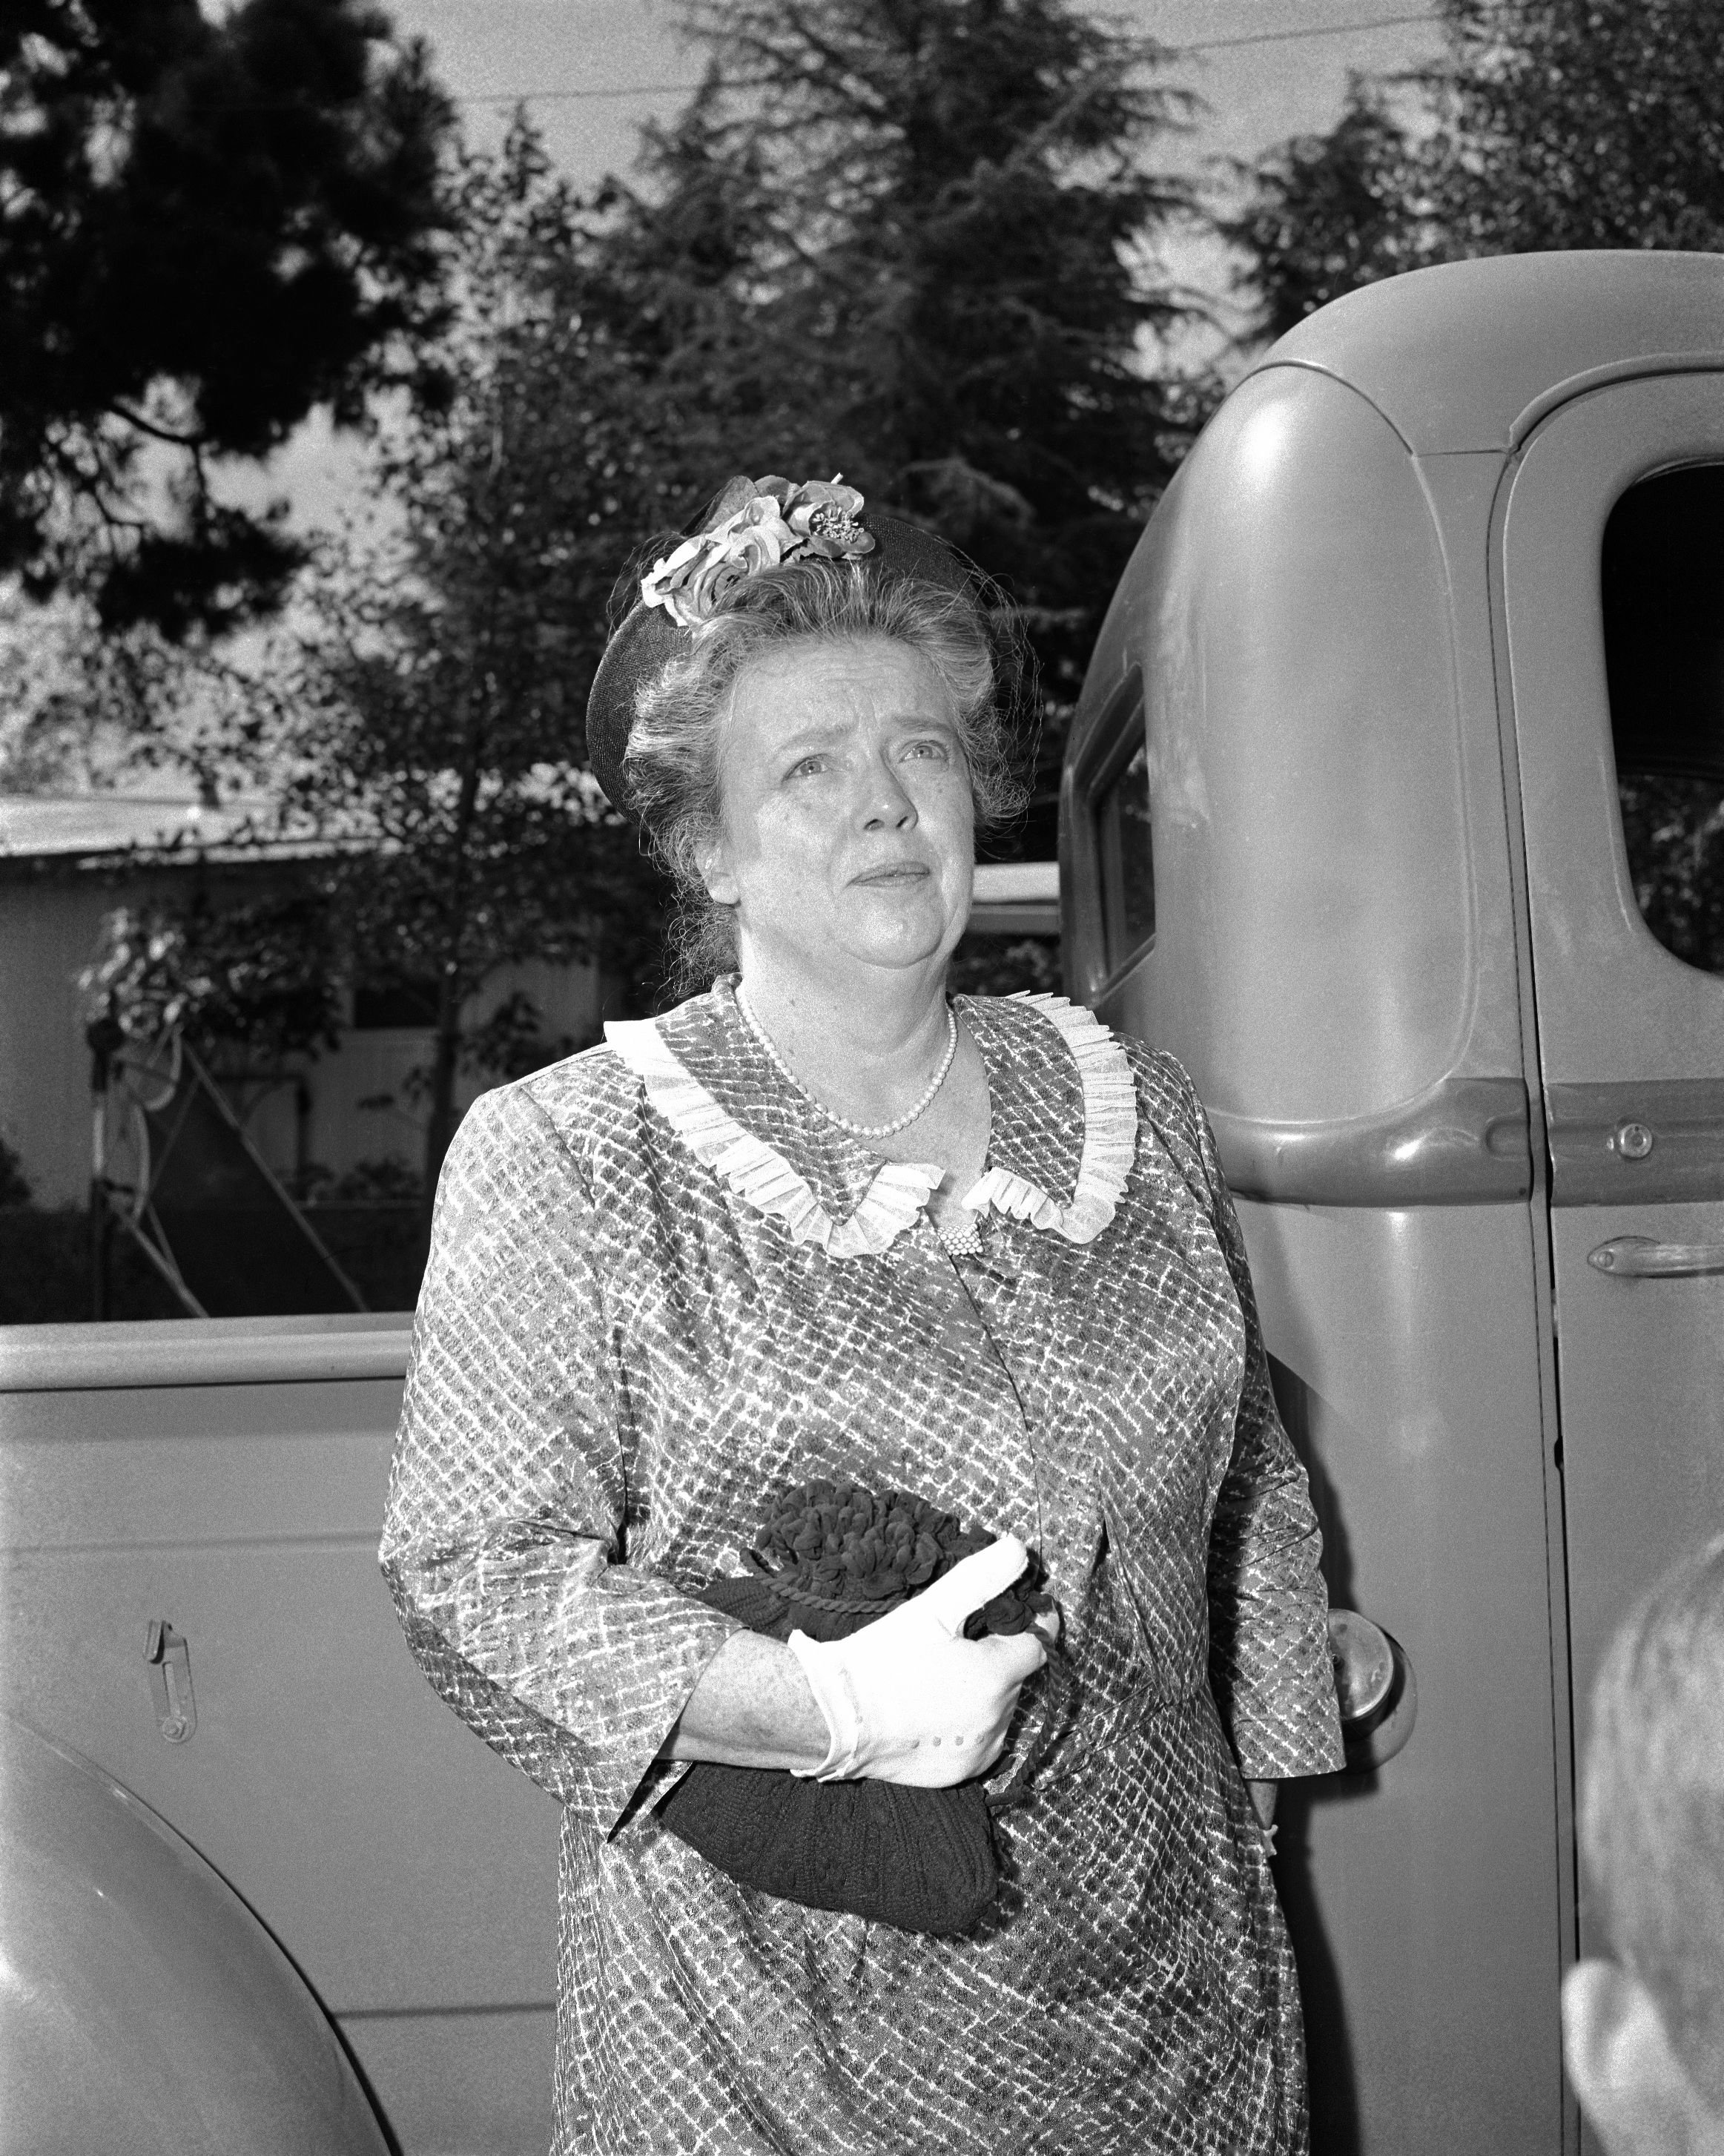 Frances Bavier as Aunt Bee on "The Andy Griffith Show" in 1960 | Photo: CBS via Getty Images